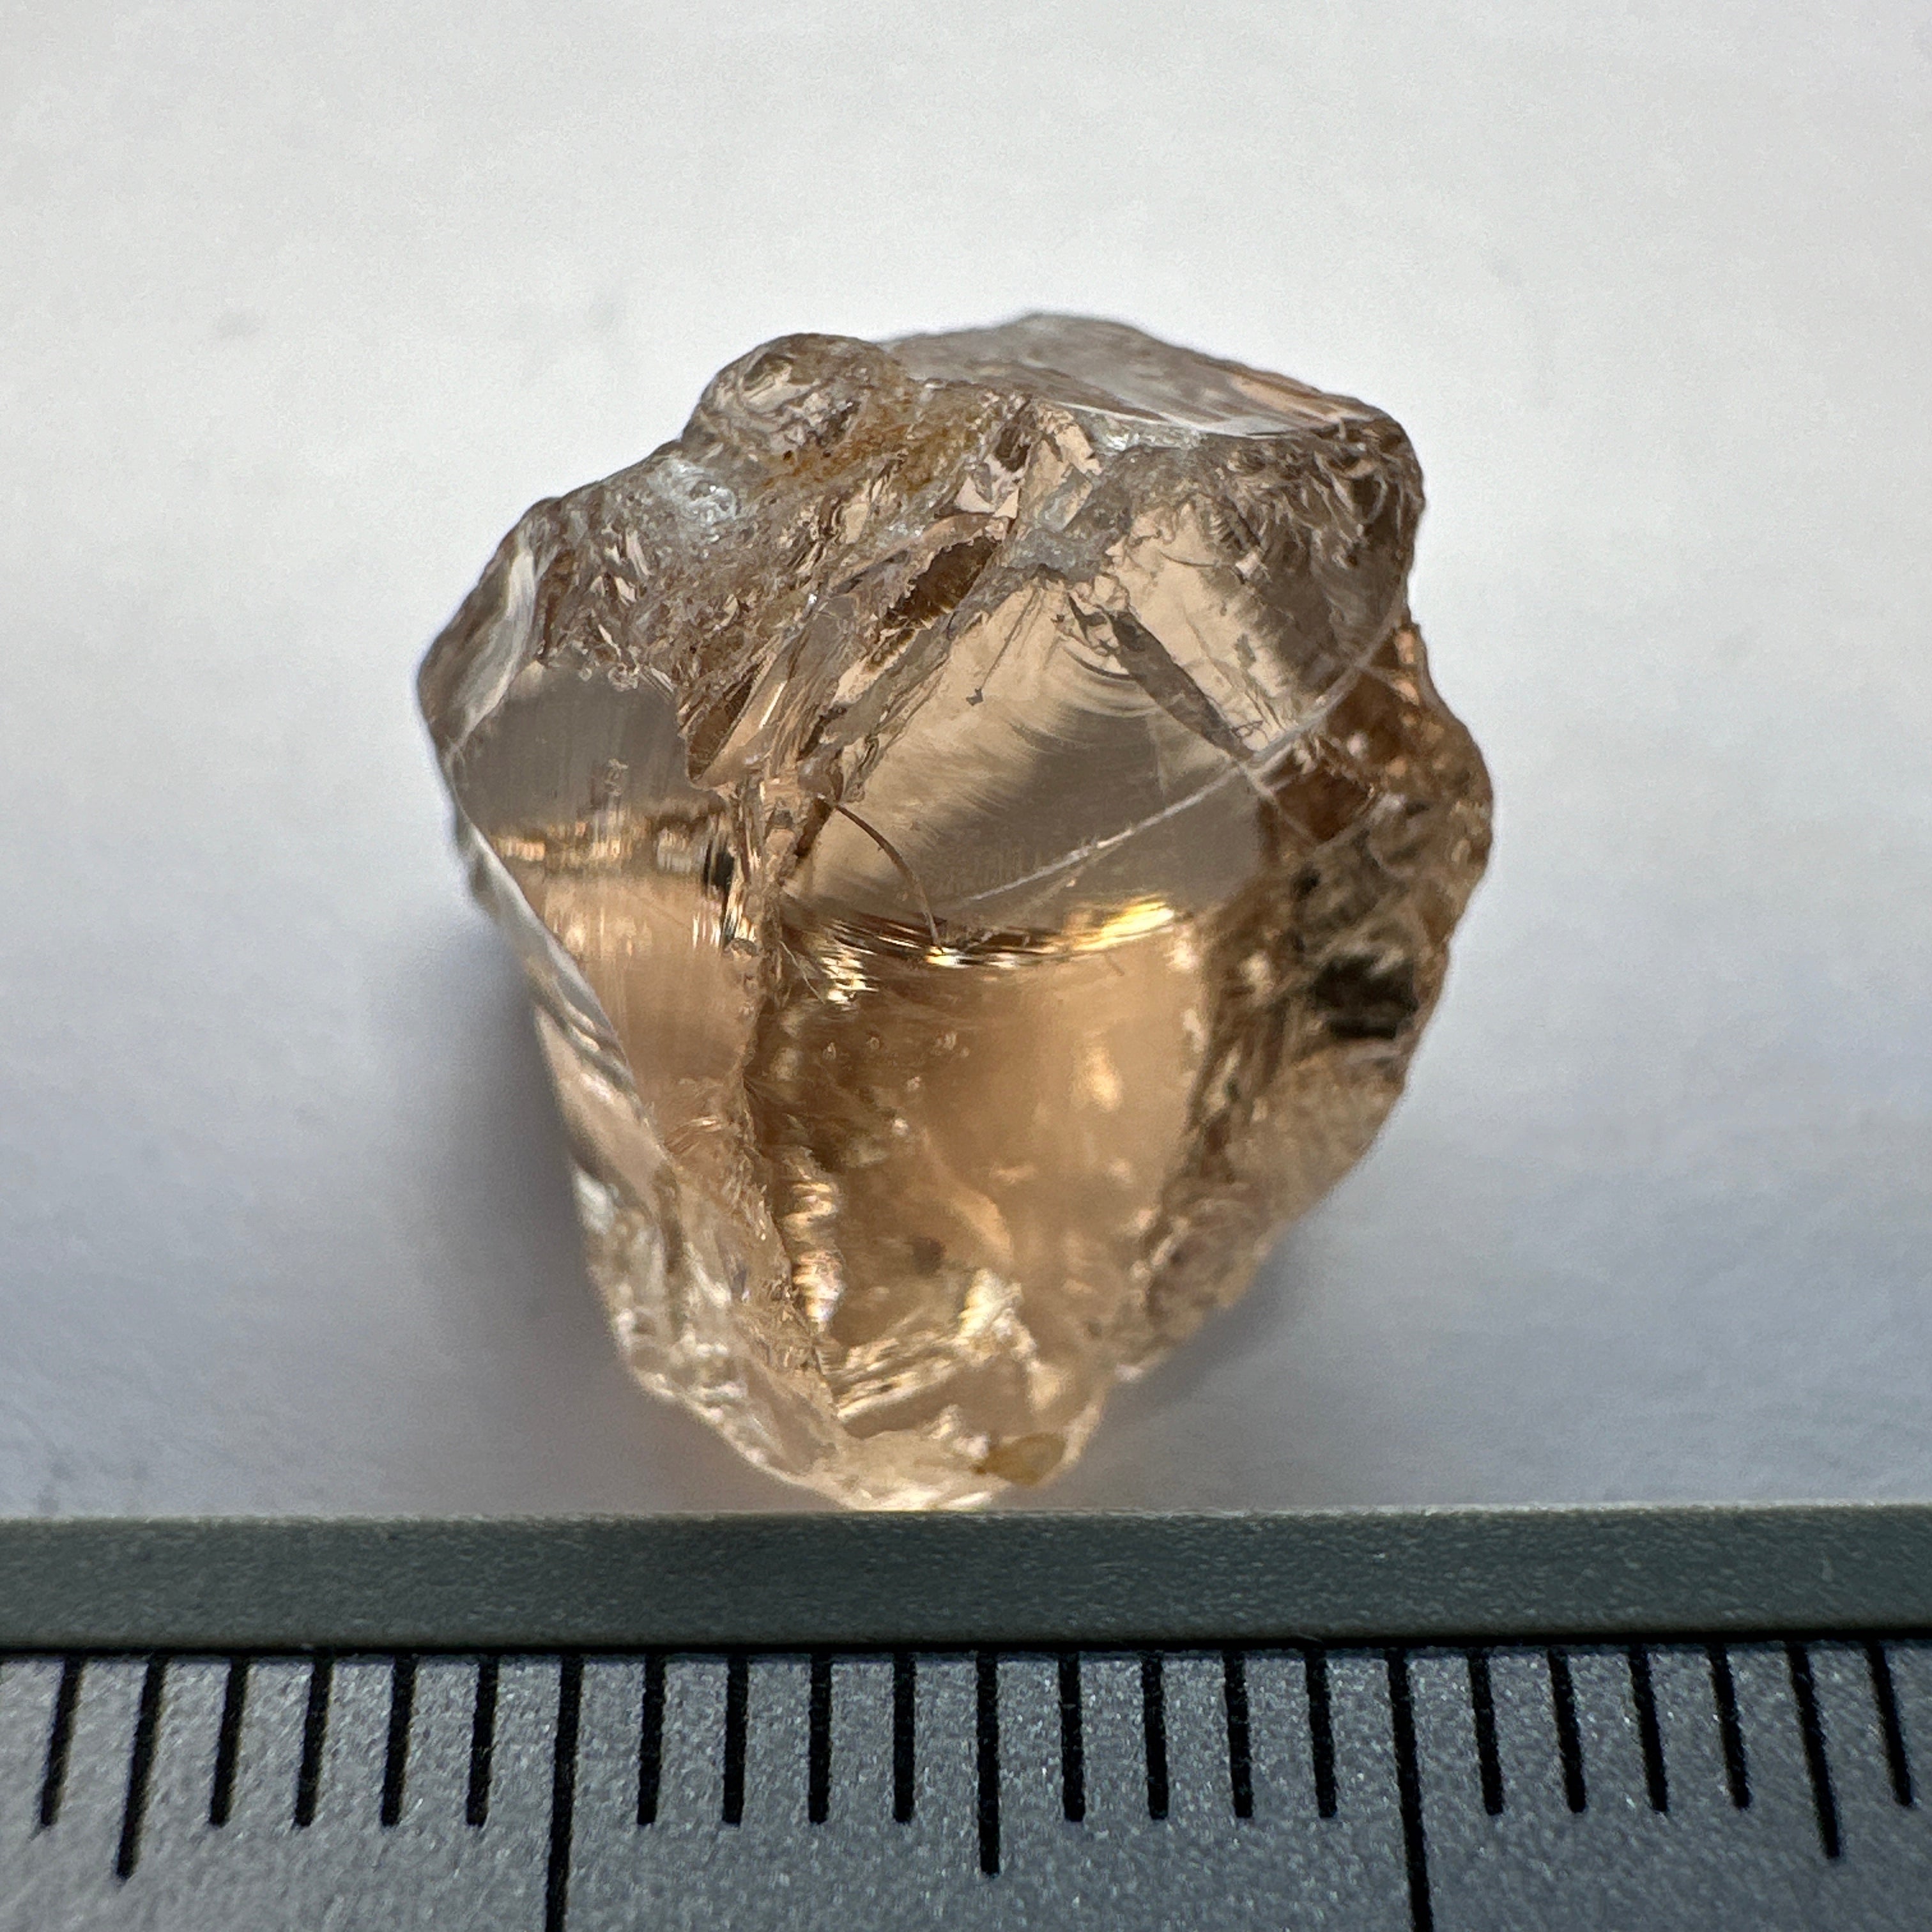 18.22ct Very Rare, Peach Pink Scapolite, Tanzania, Untreated Unheated, VVS-IF (flawless)